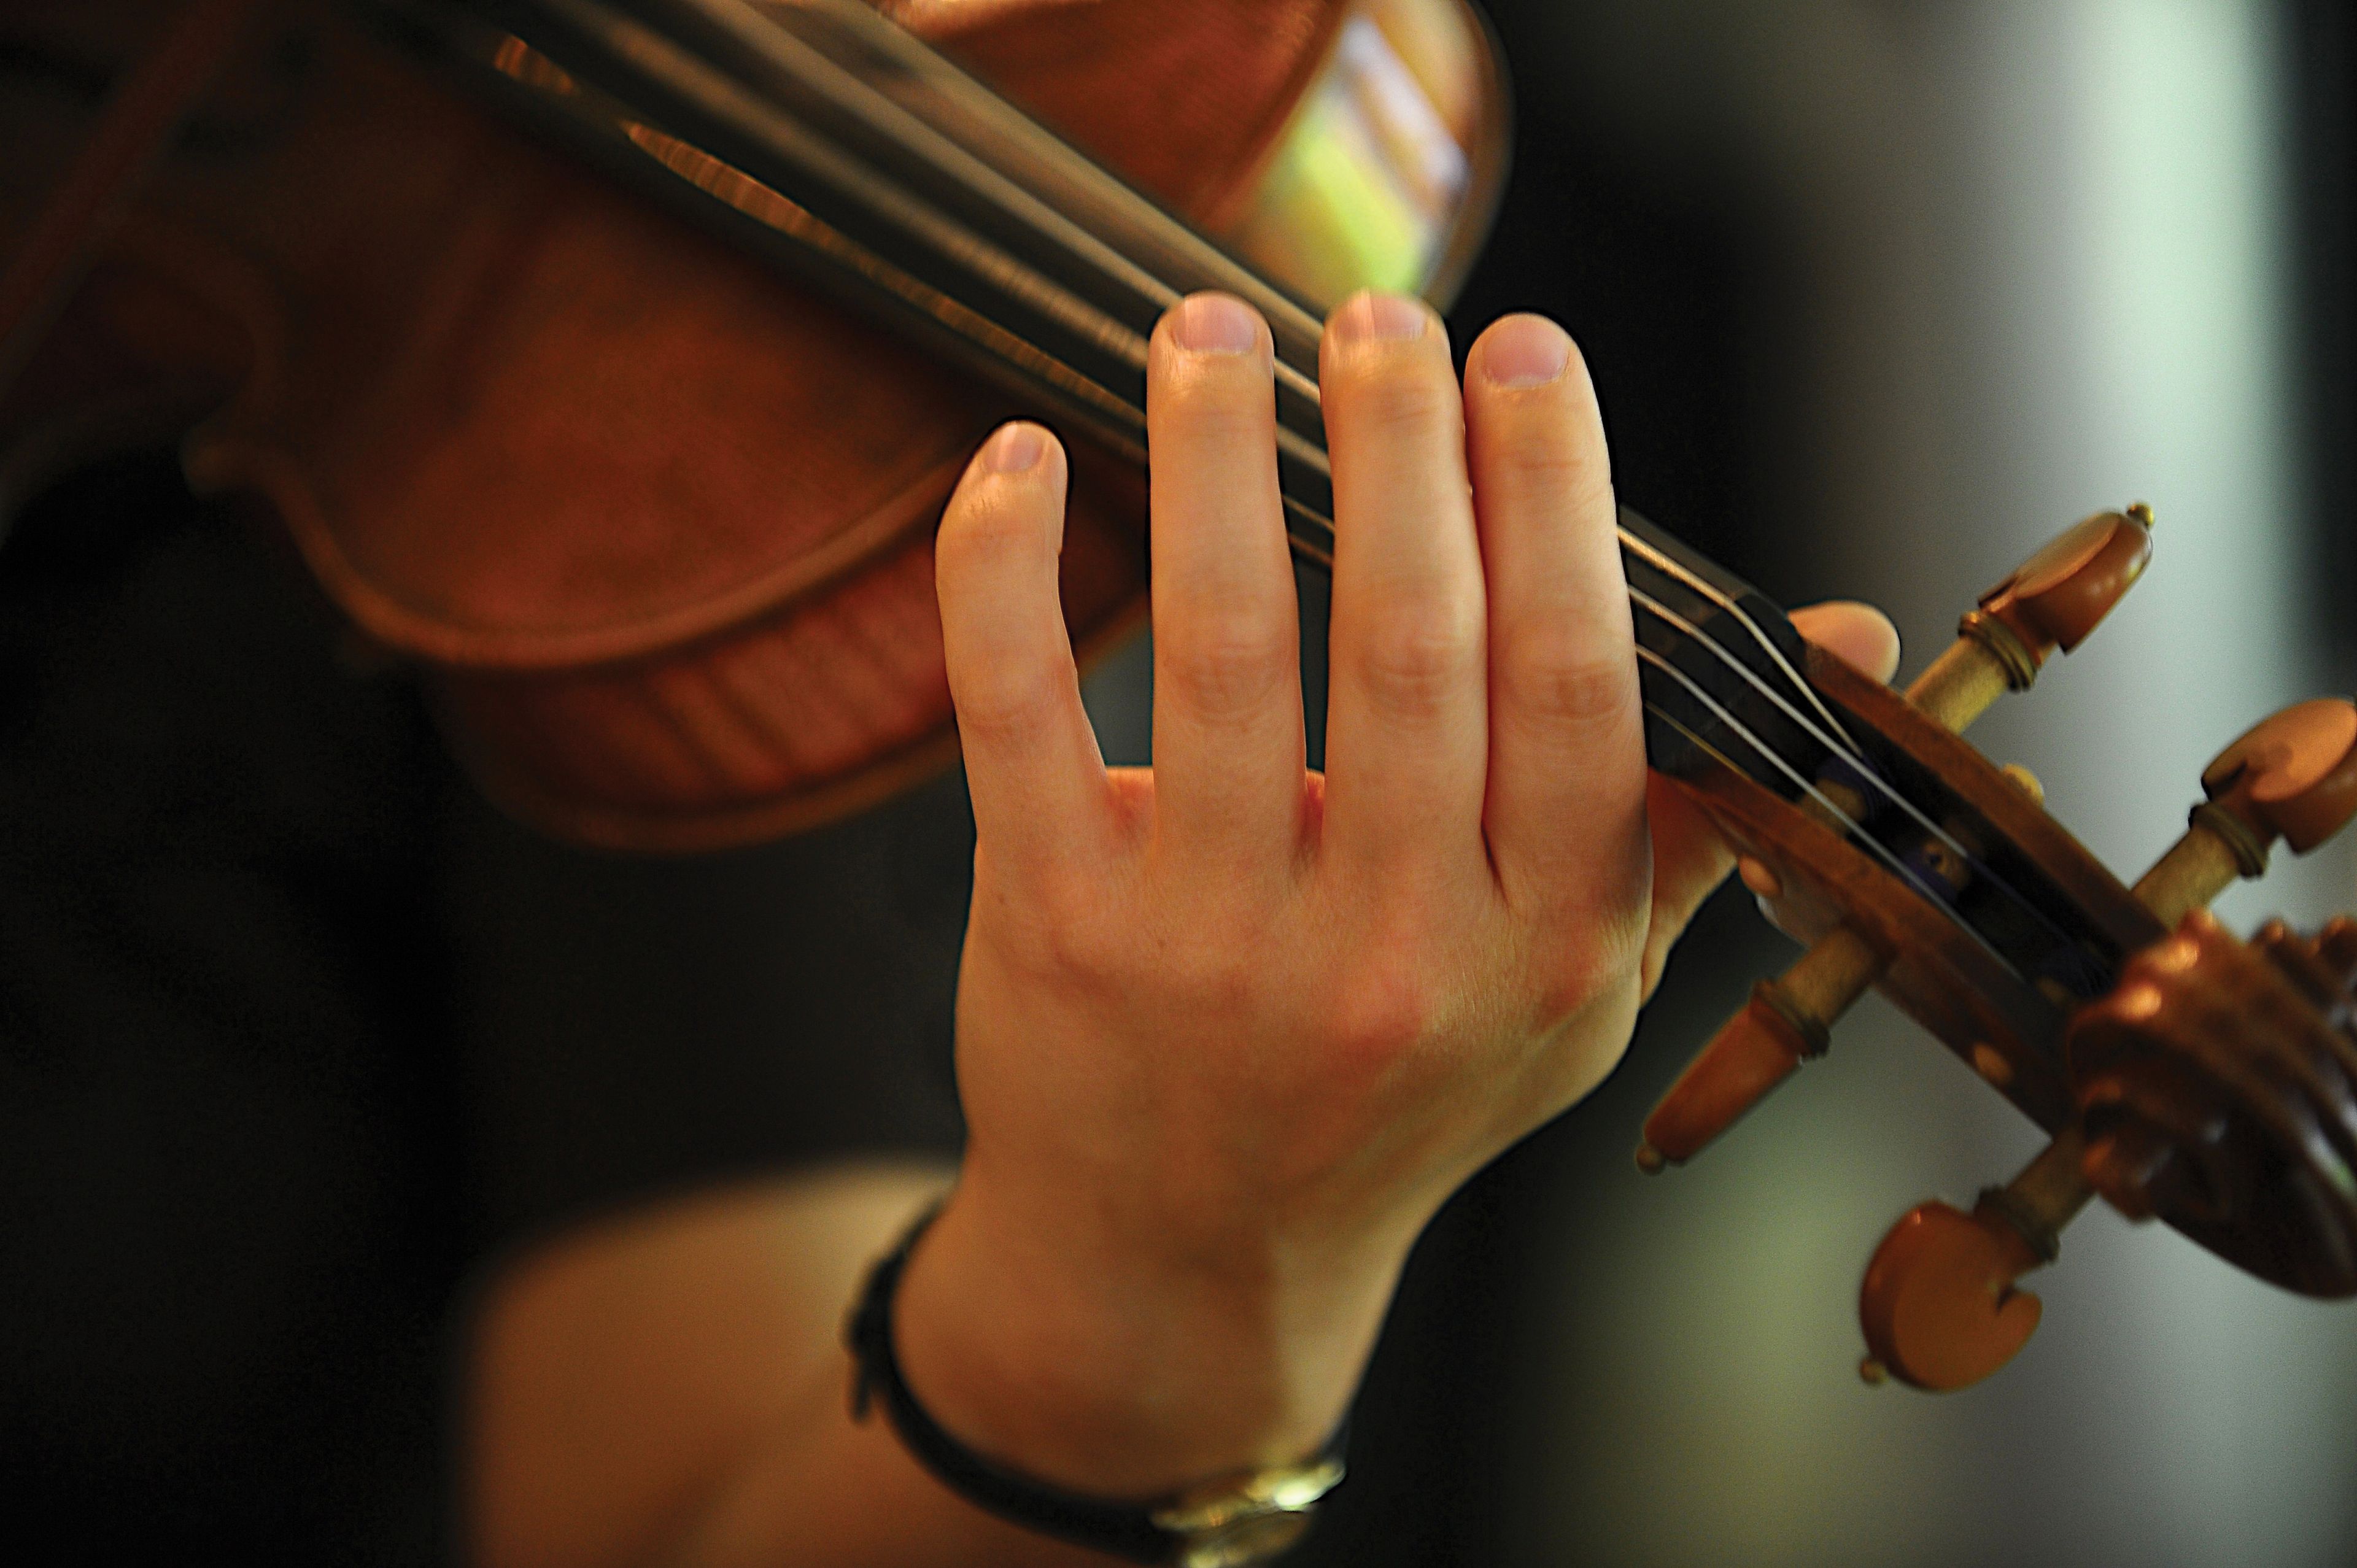 A close-up image of a hand playing on a violin.